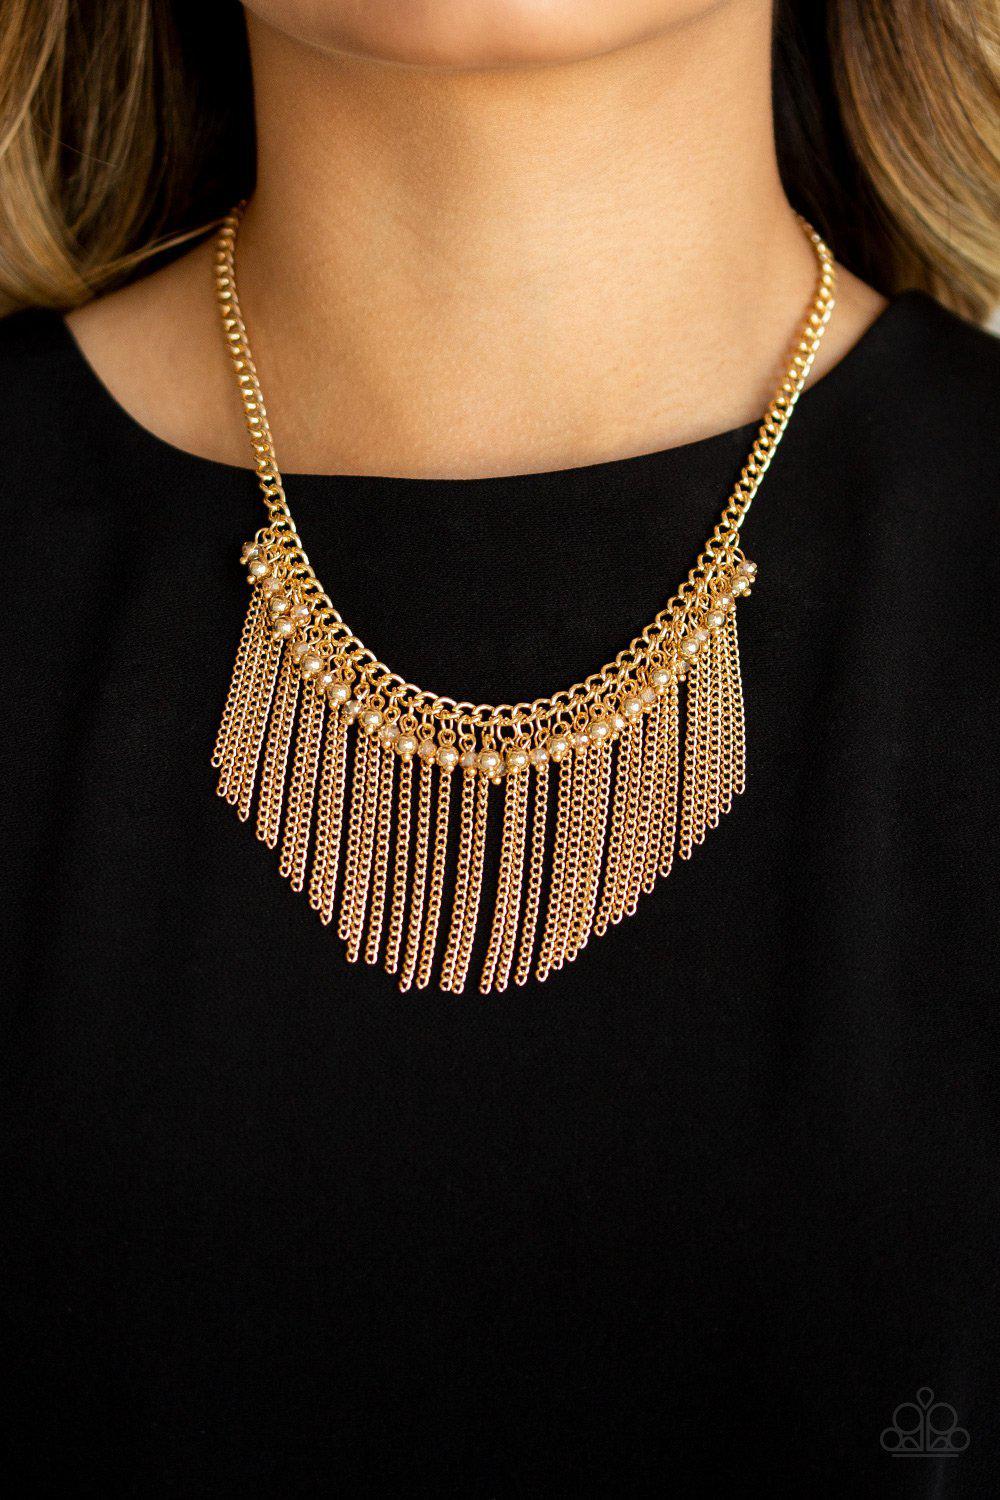 Divinely Diva Gold Fringe Necklace - Paparazzi Accessories - model -CarasShop.com - $5 Jewelry by Cara Jewels